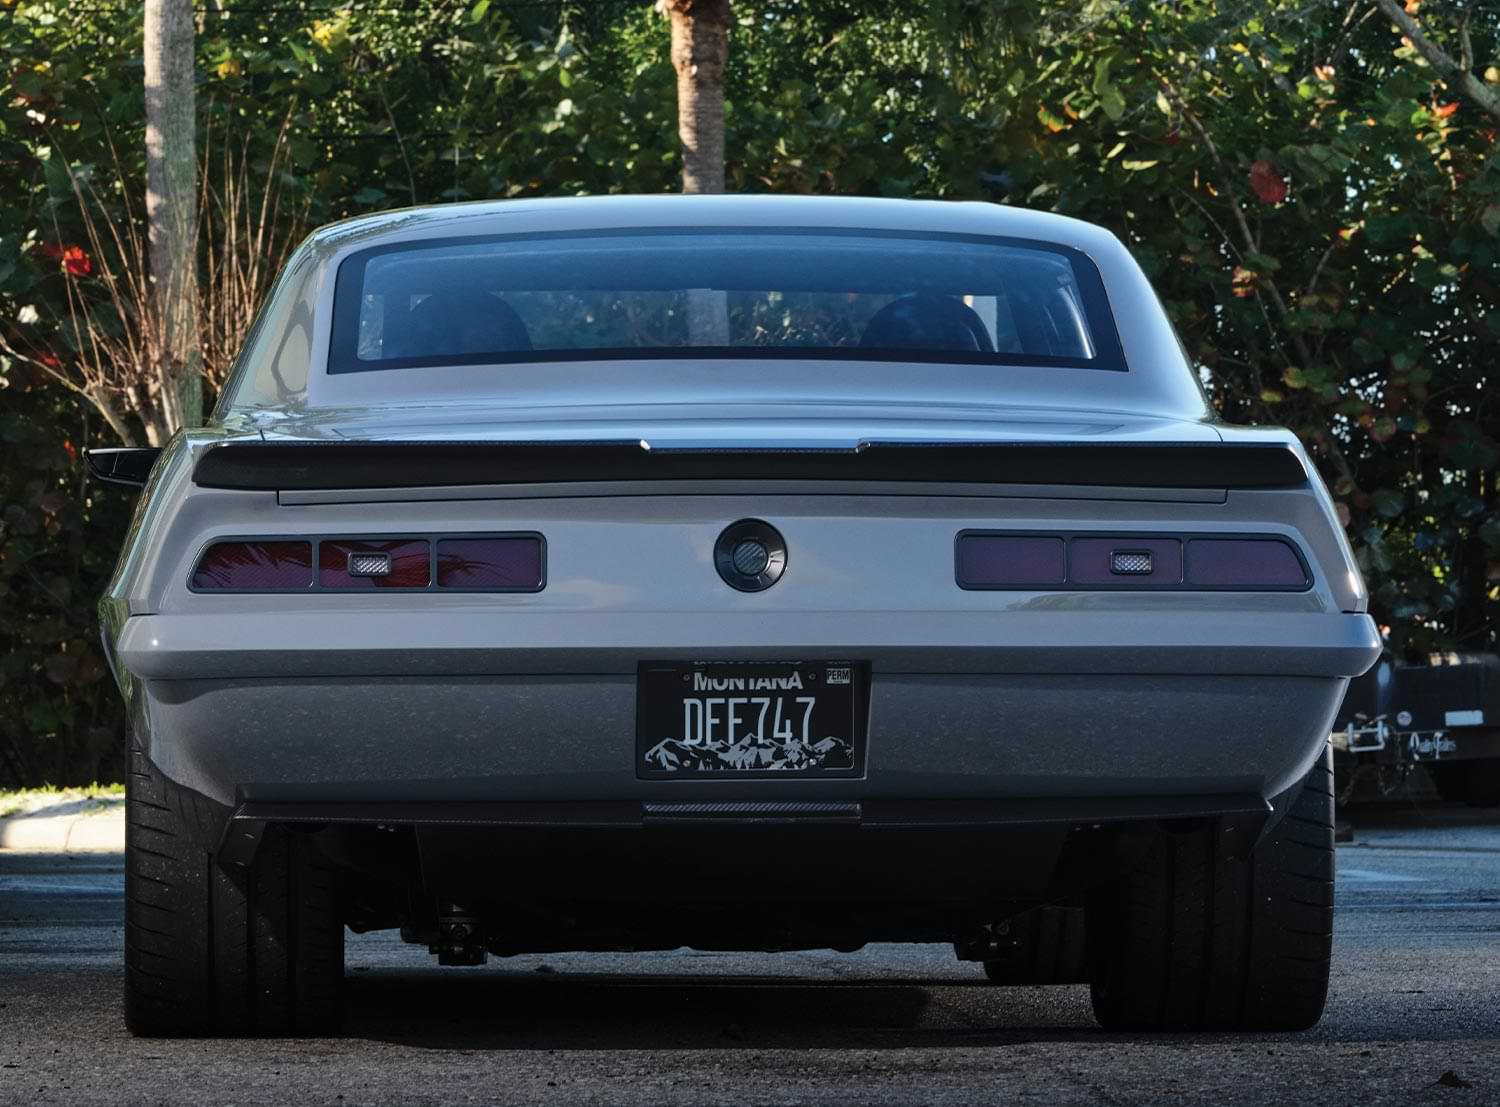 rear view of the '69 Camaro